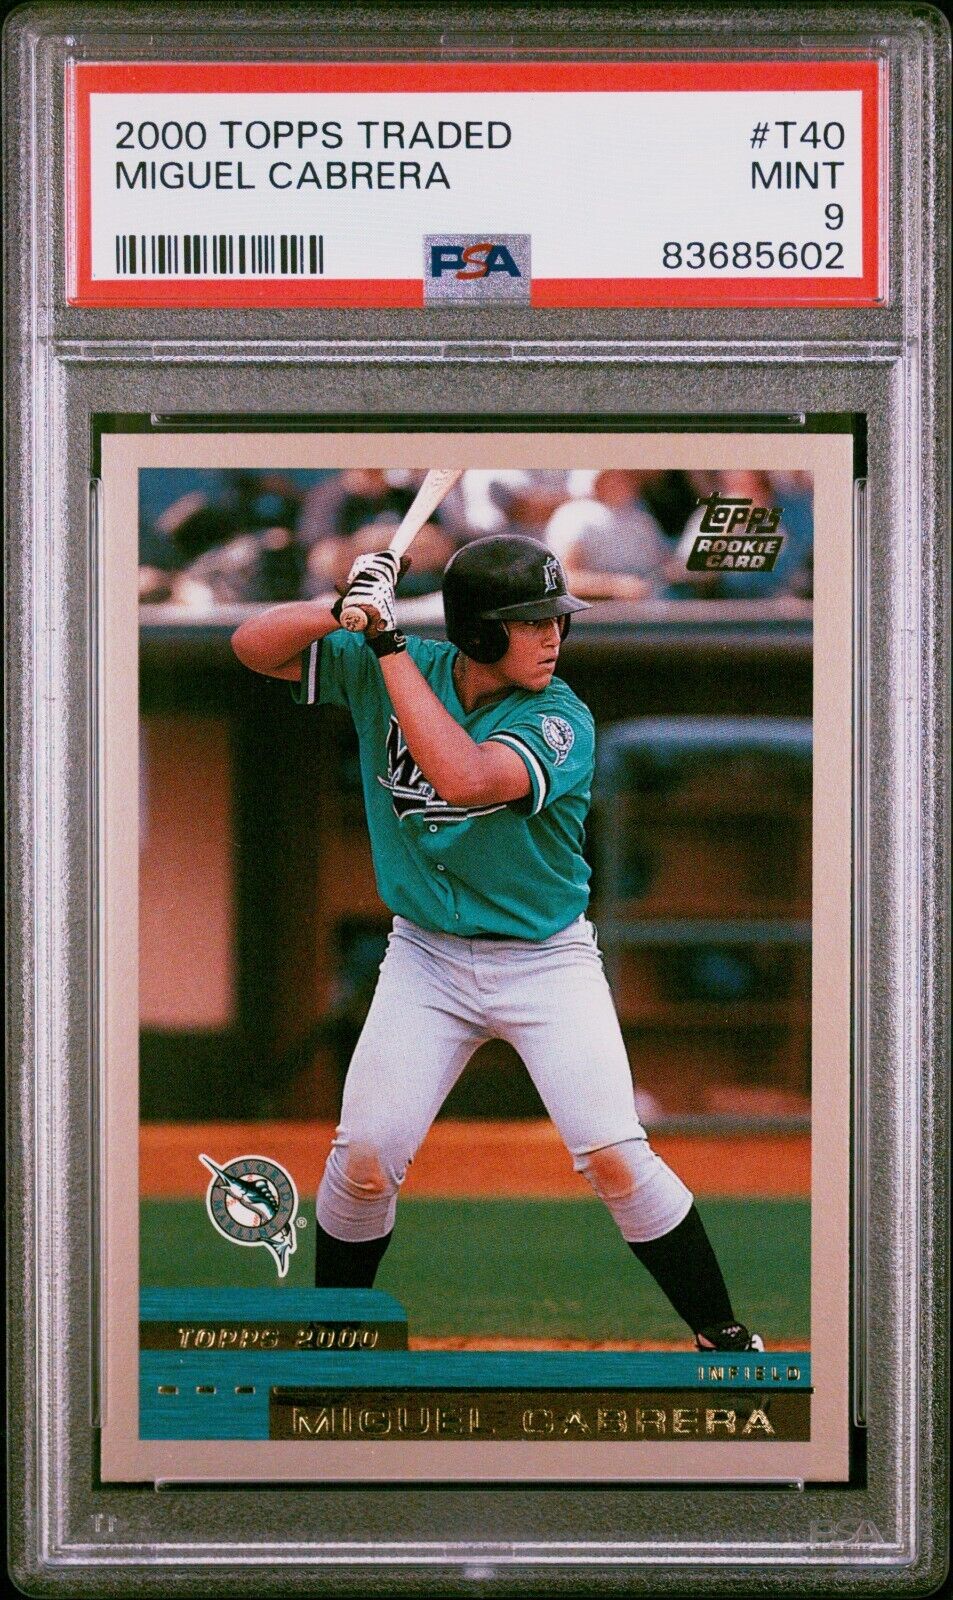 2000 Topps Traded Miguel Cabrera RC T40 PSA 9 Mint - Brand New Slab